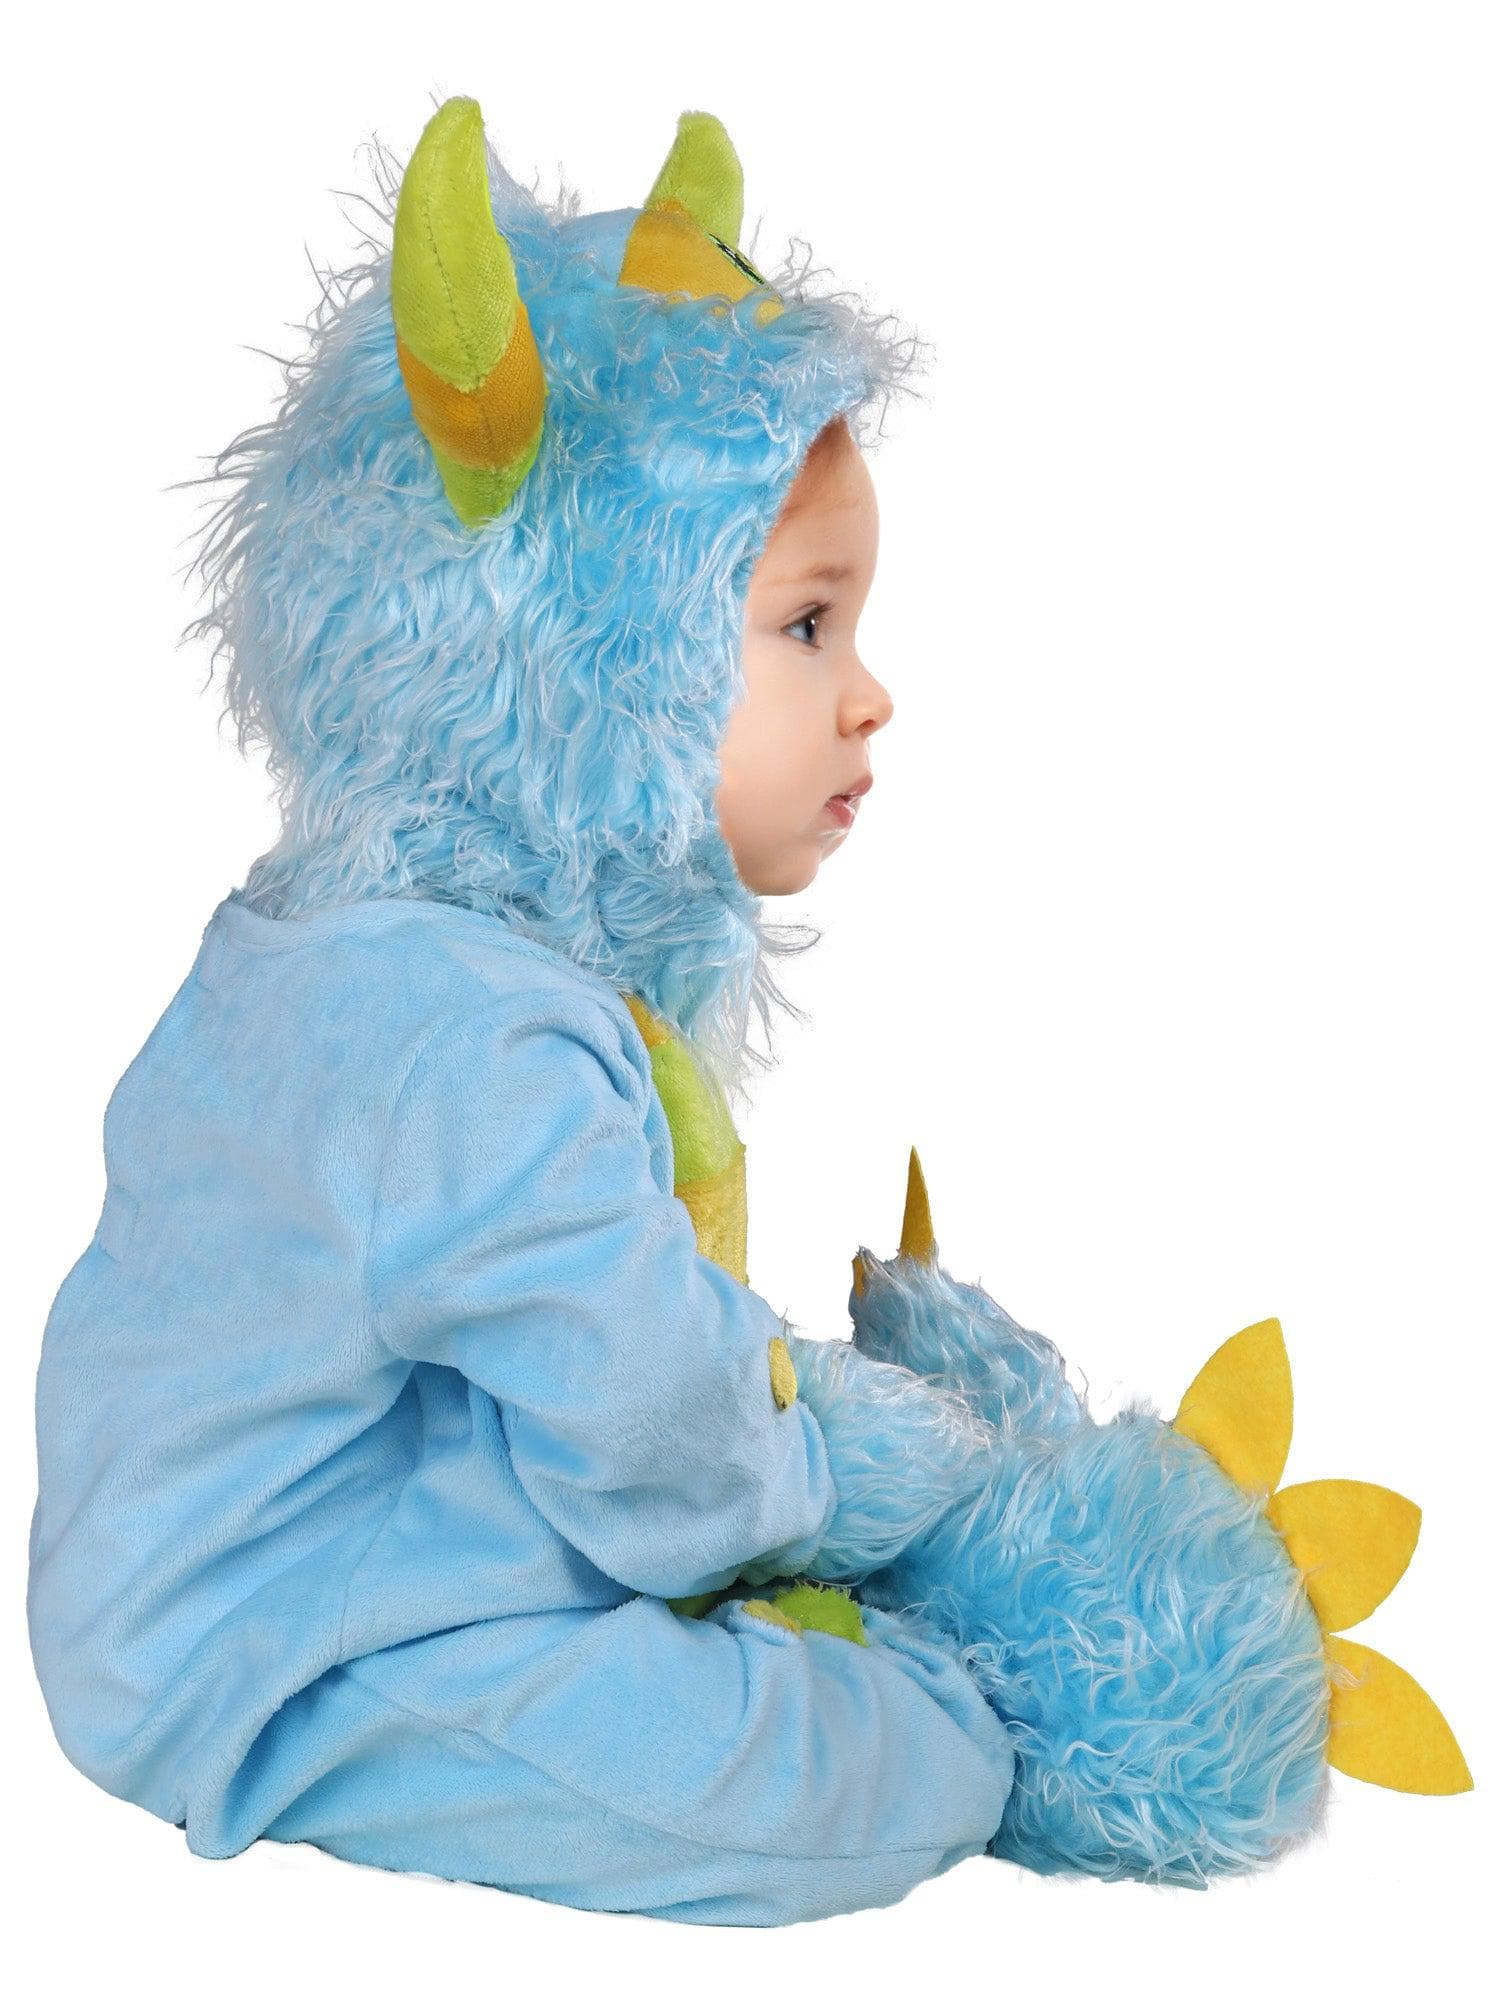 Blue Monster Baby/Toddler Costume - costumes.com